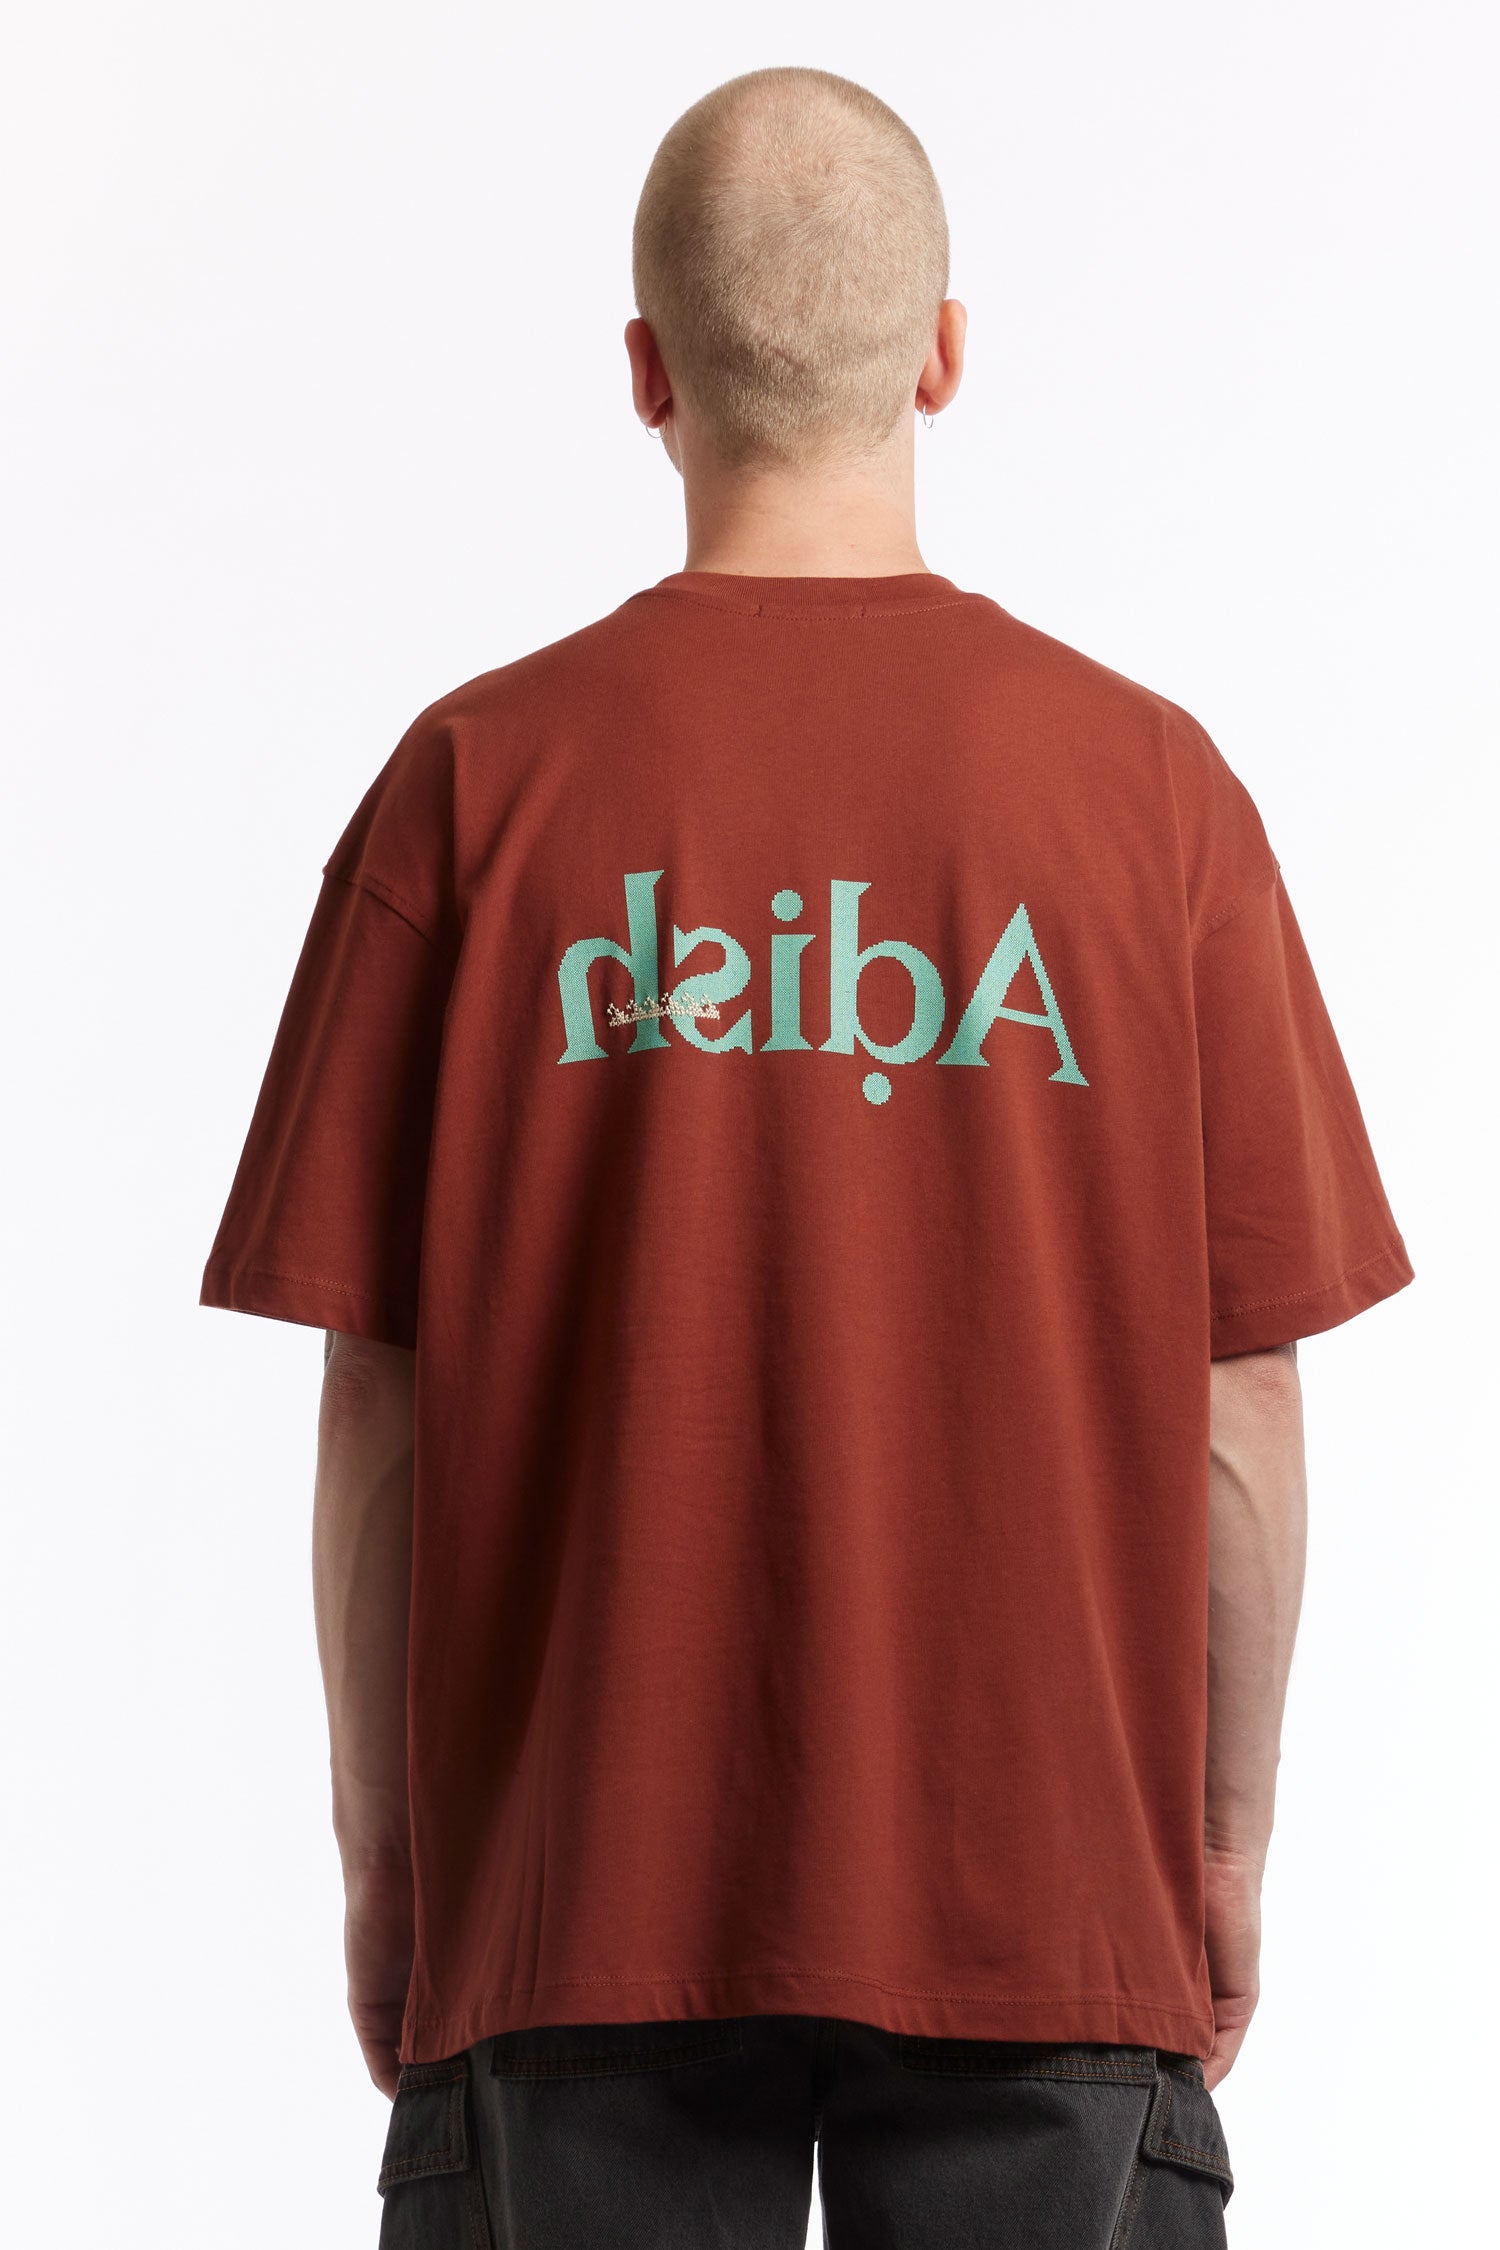 The ADISH - SHORT SLEEVE HEDAB LOGO T-SHIRT  available online with global shipping, and in PAM Stores Melbourne and Sydney.